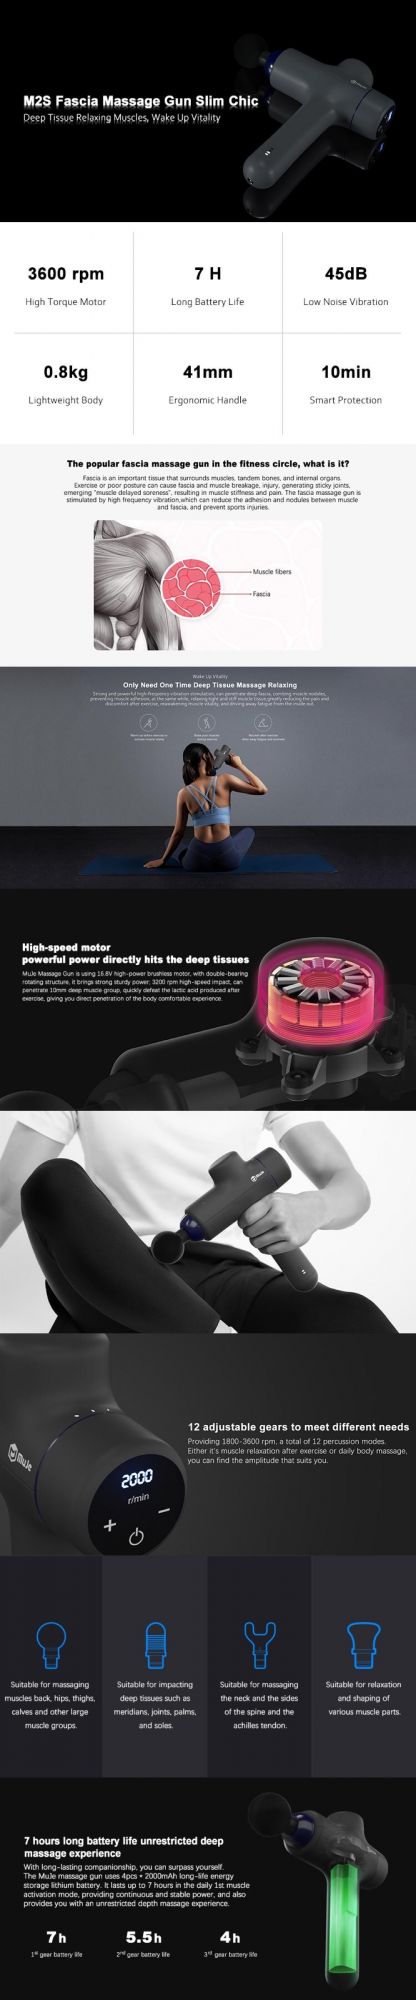 Powerful LCD Touch Vibration Machines Muscle Therapy Massager Gun